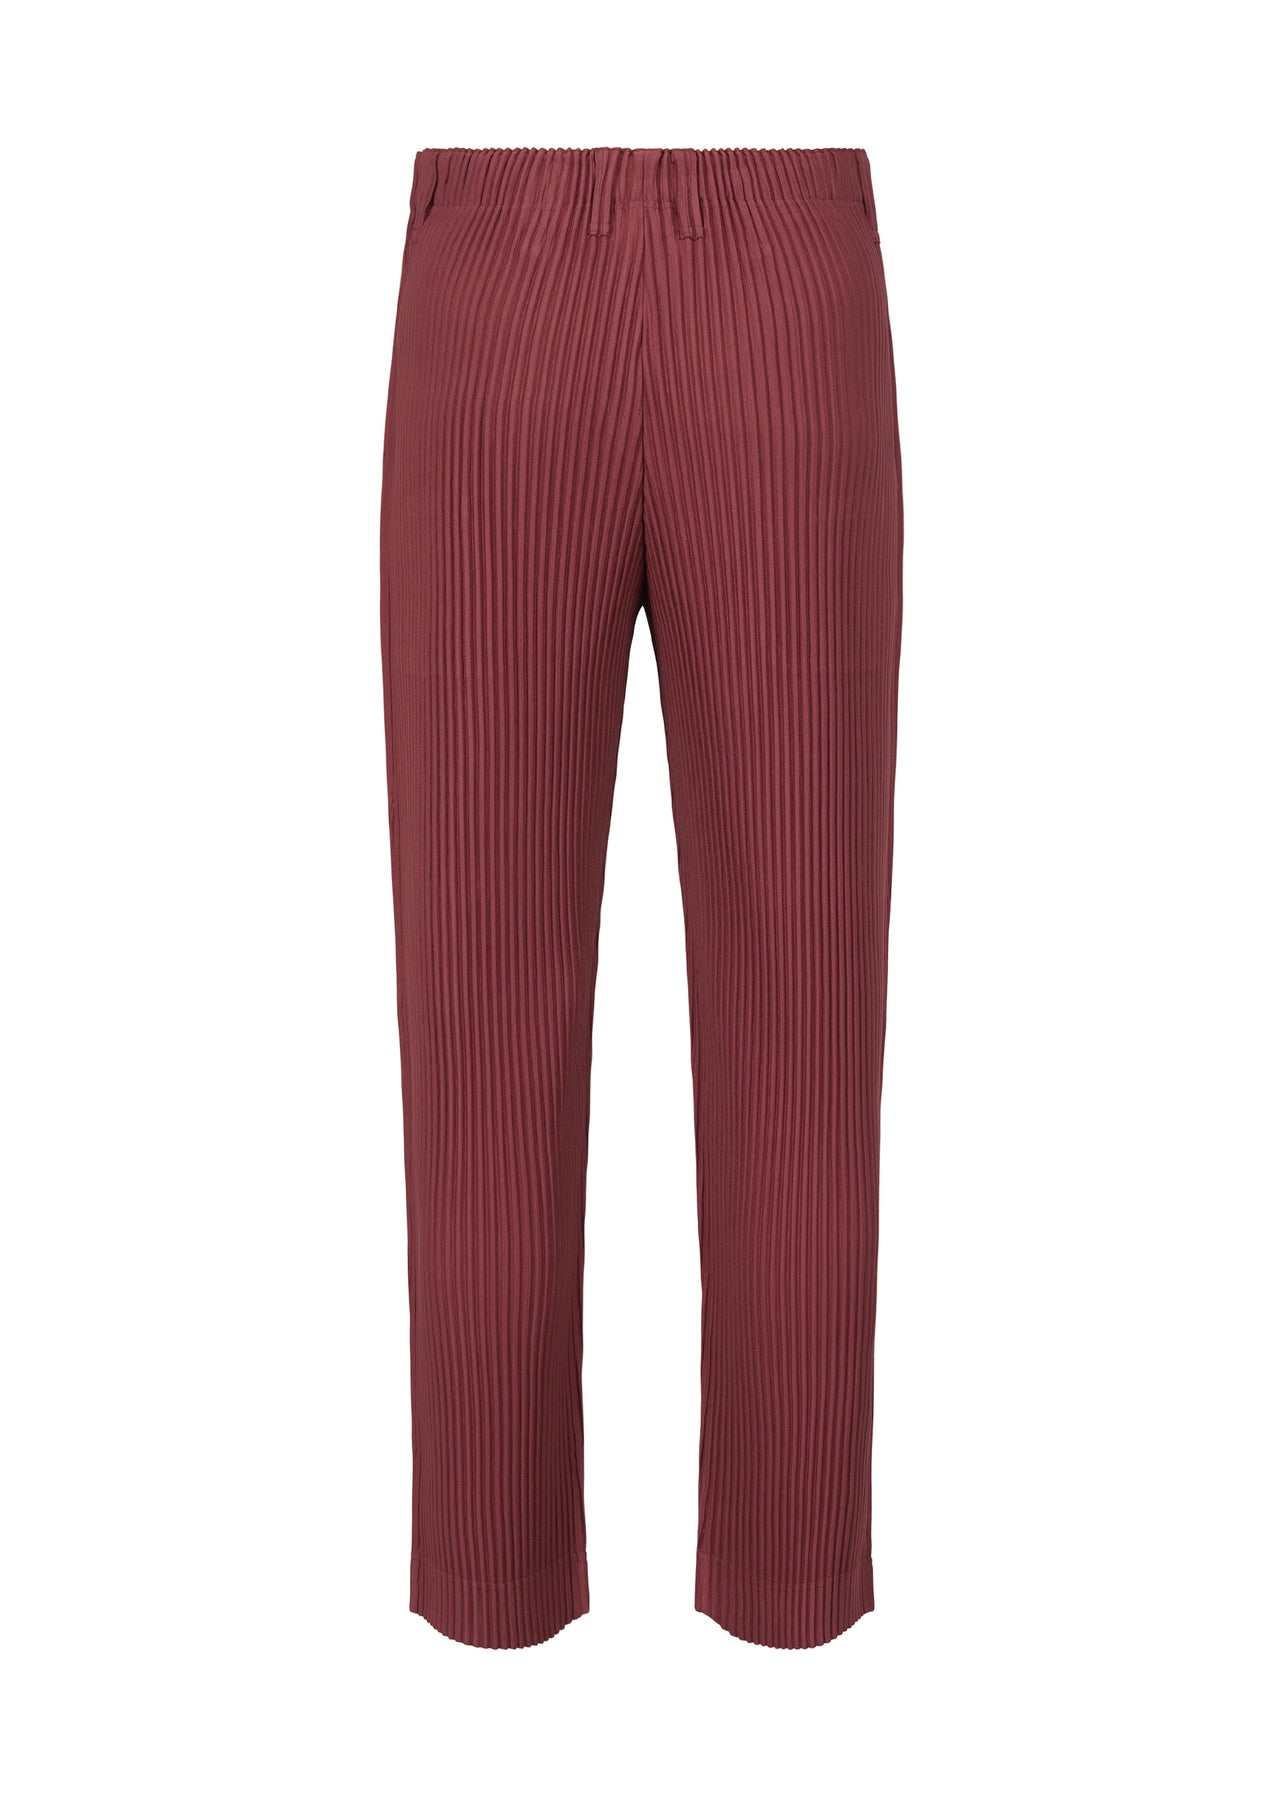 COLOR PLEATS PANTS | The official ISSEY MIYAKE ONLINE STORE 